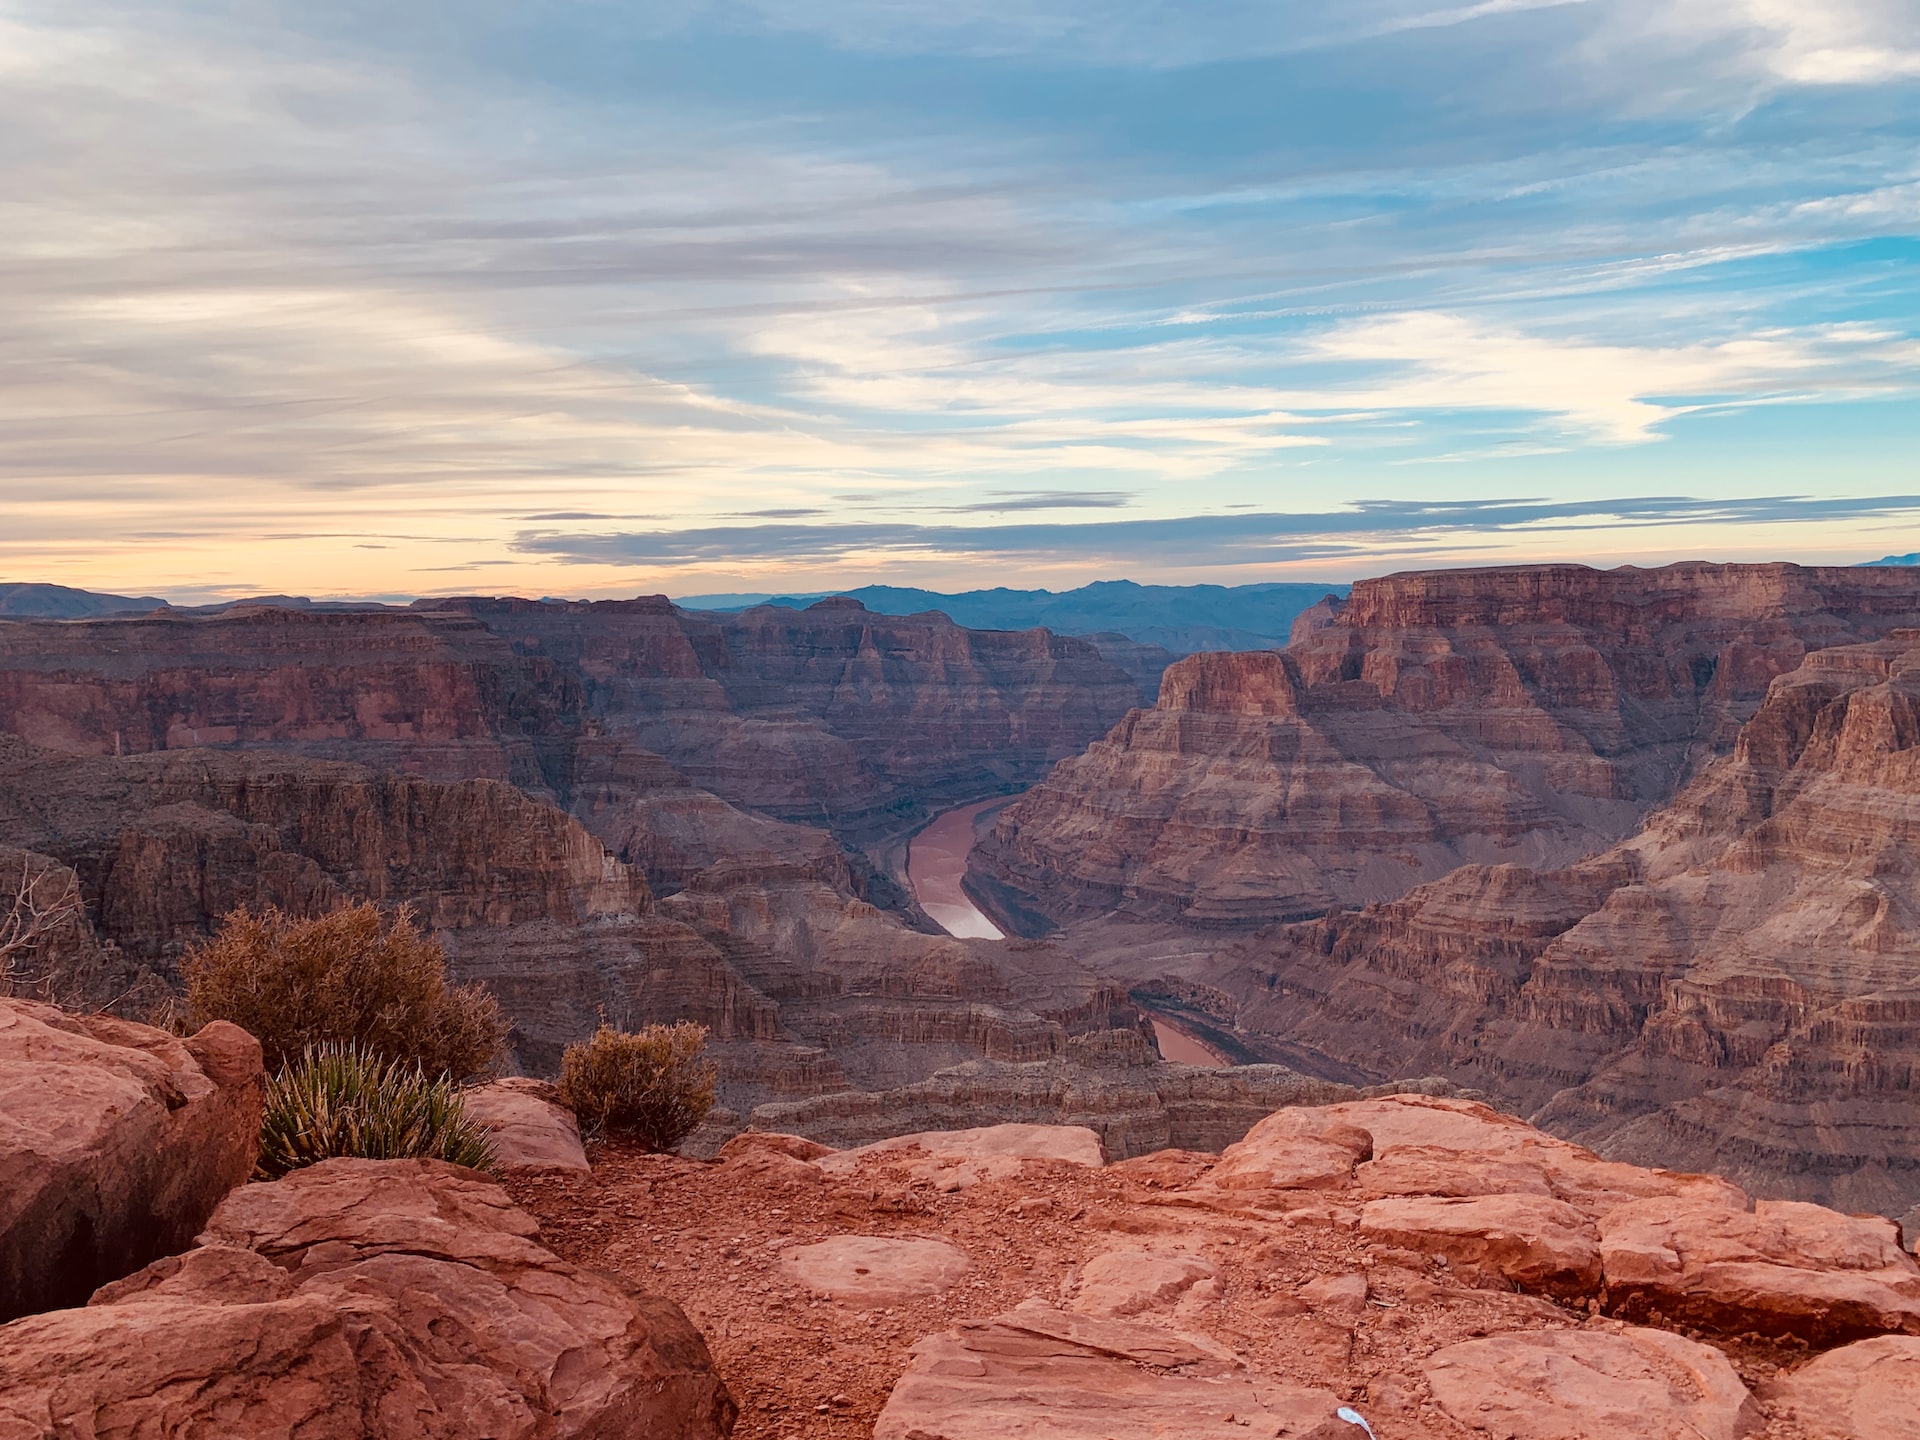 Grand Canyon is one of the top nature travel destinations
